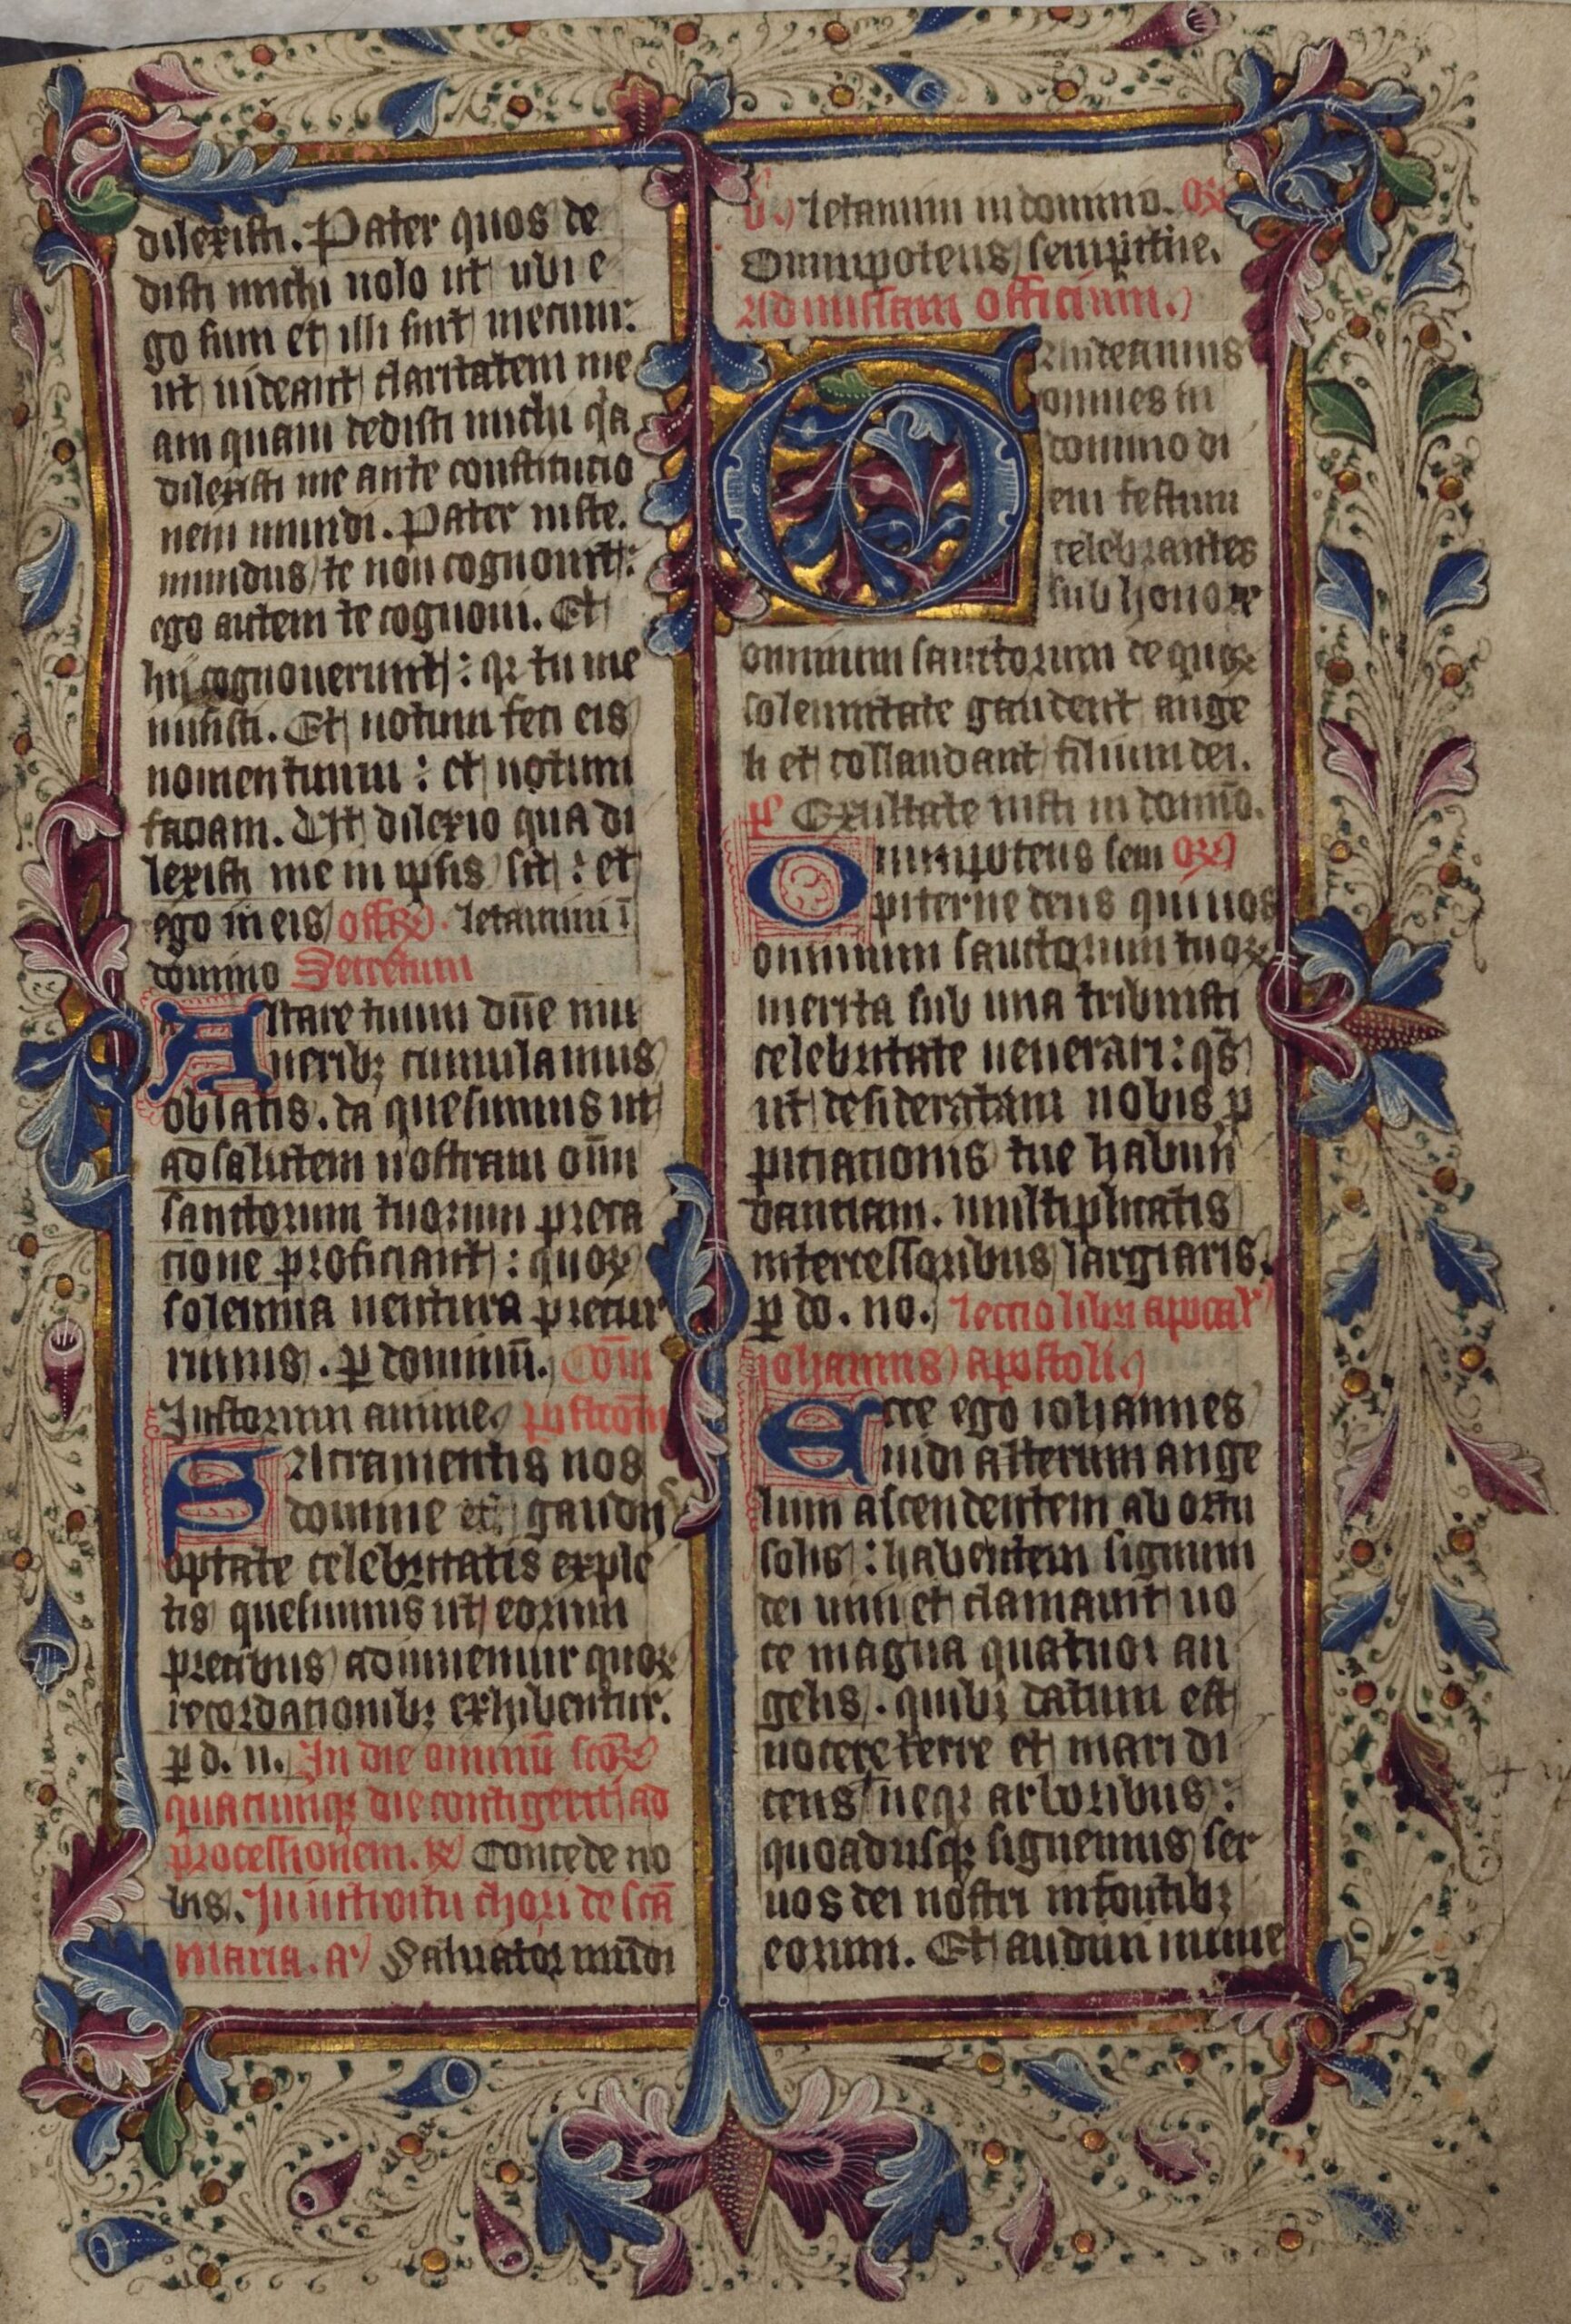 An old and colourful illustrated manuscript